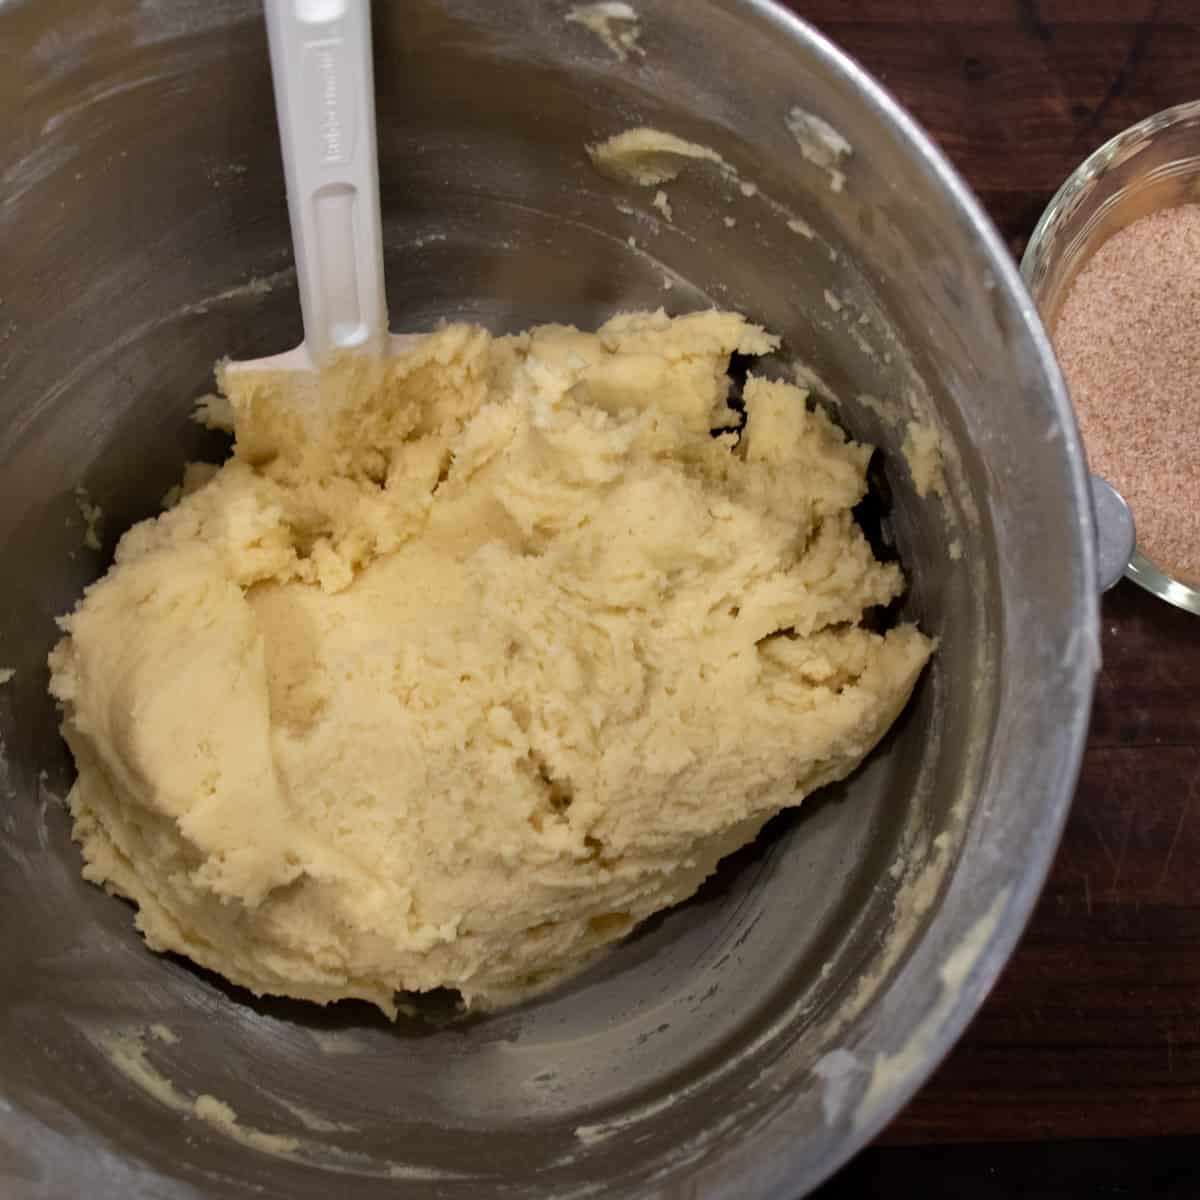 A mixing bowl of cookie dough.